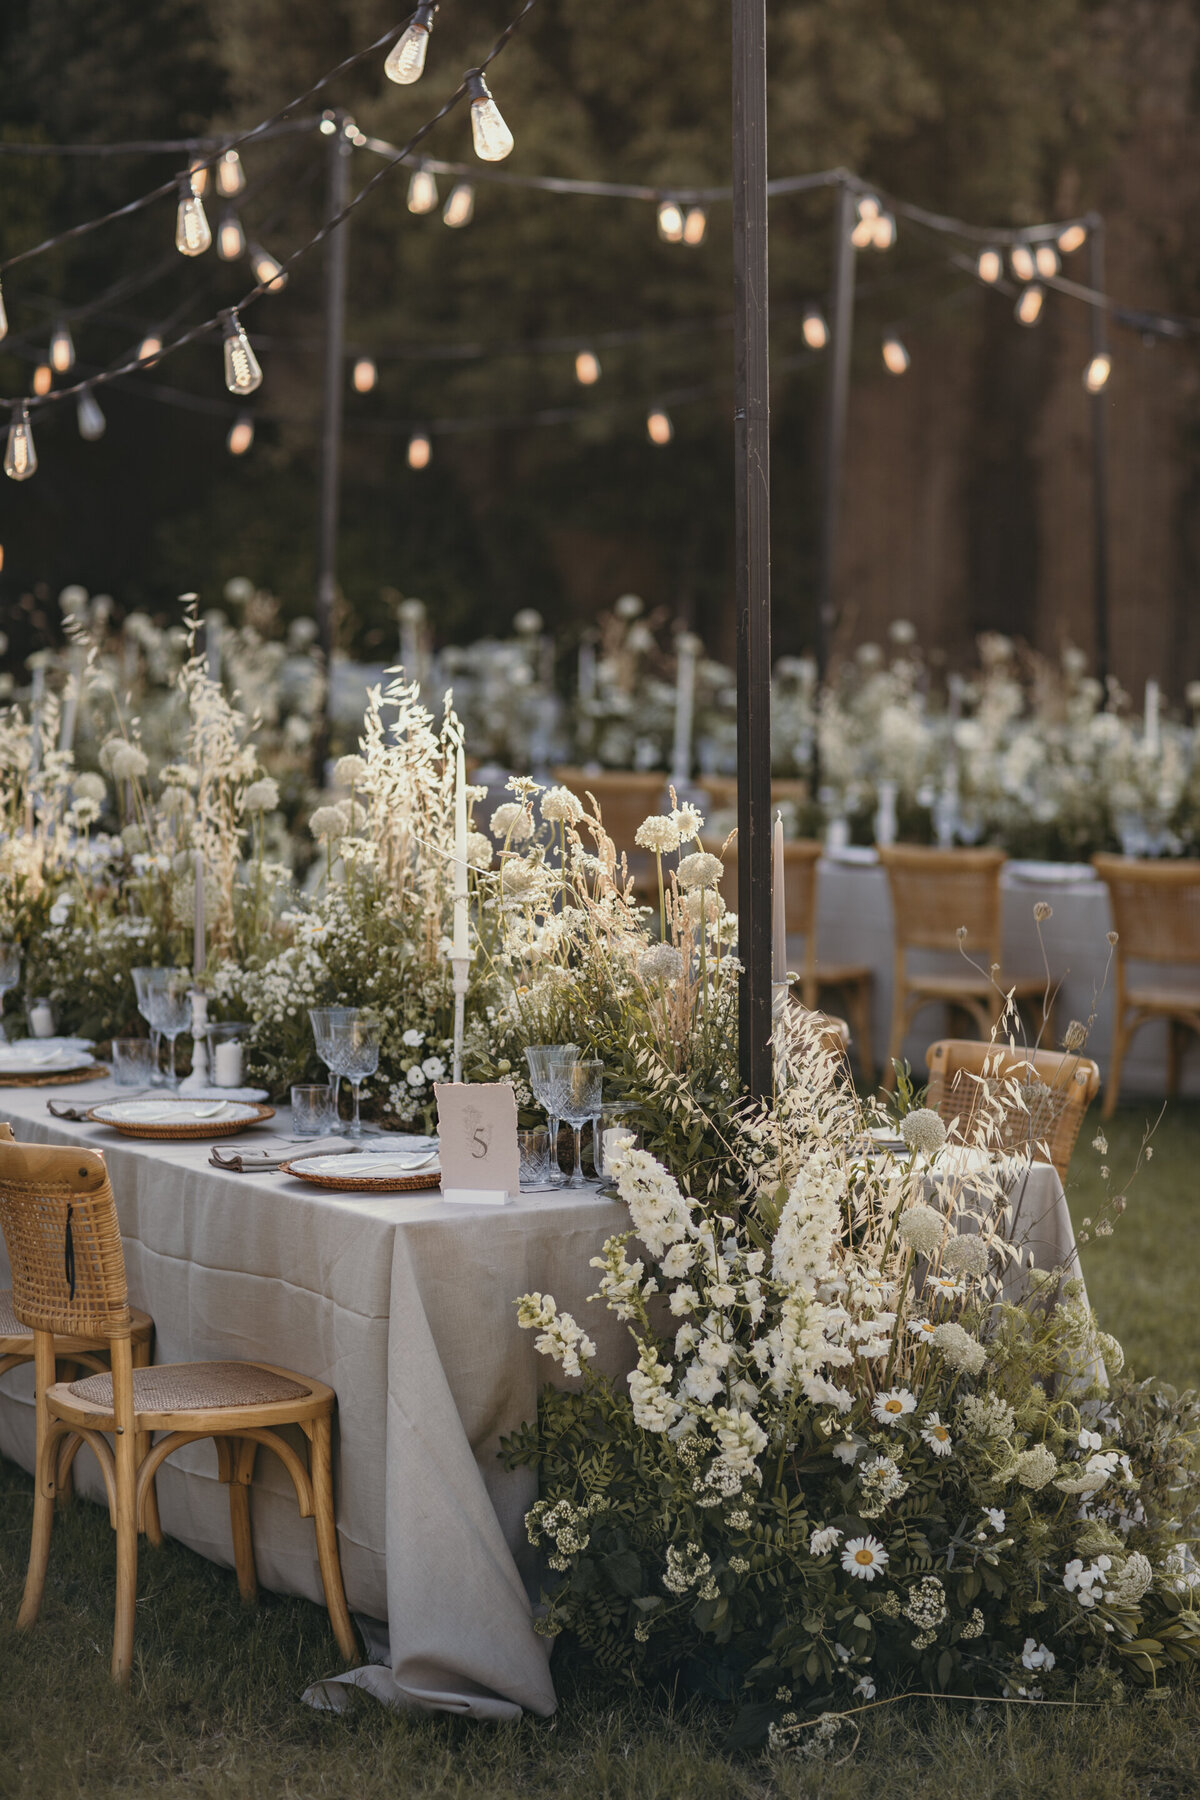 Imperial tables for a wild destination wedding